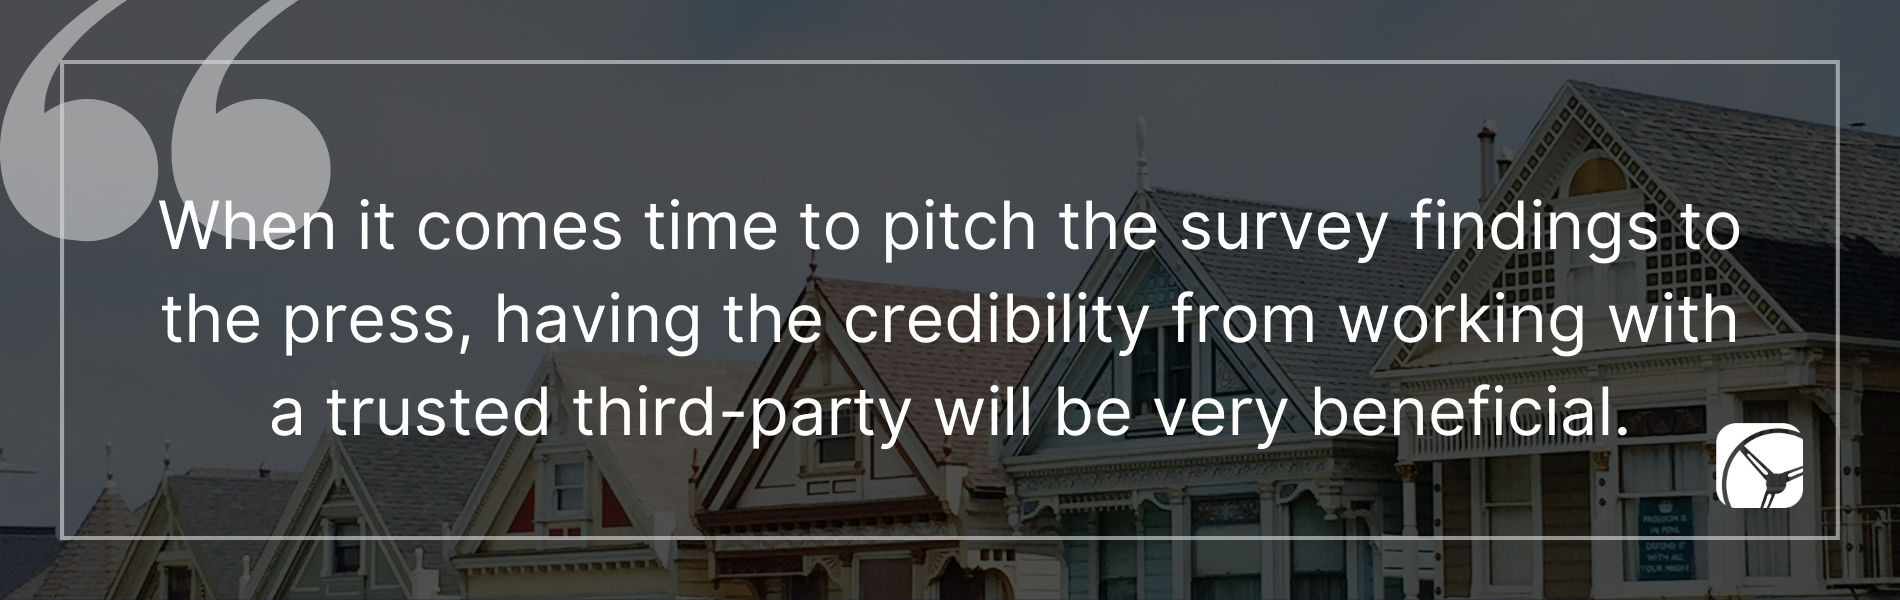 When it comes time to pitch the survey findings to the press, having the credibility from working with a trusted third-party will be very beneficial.